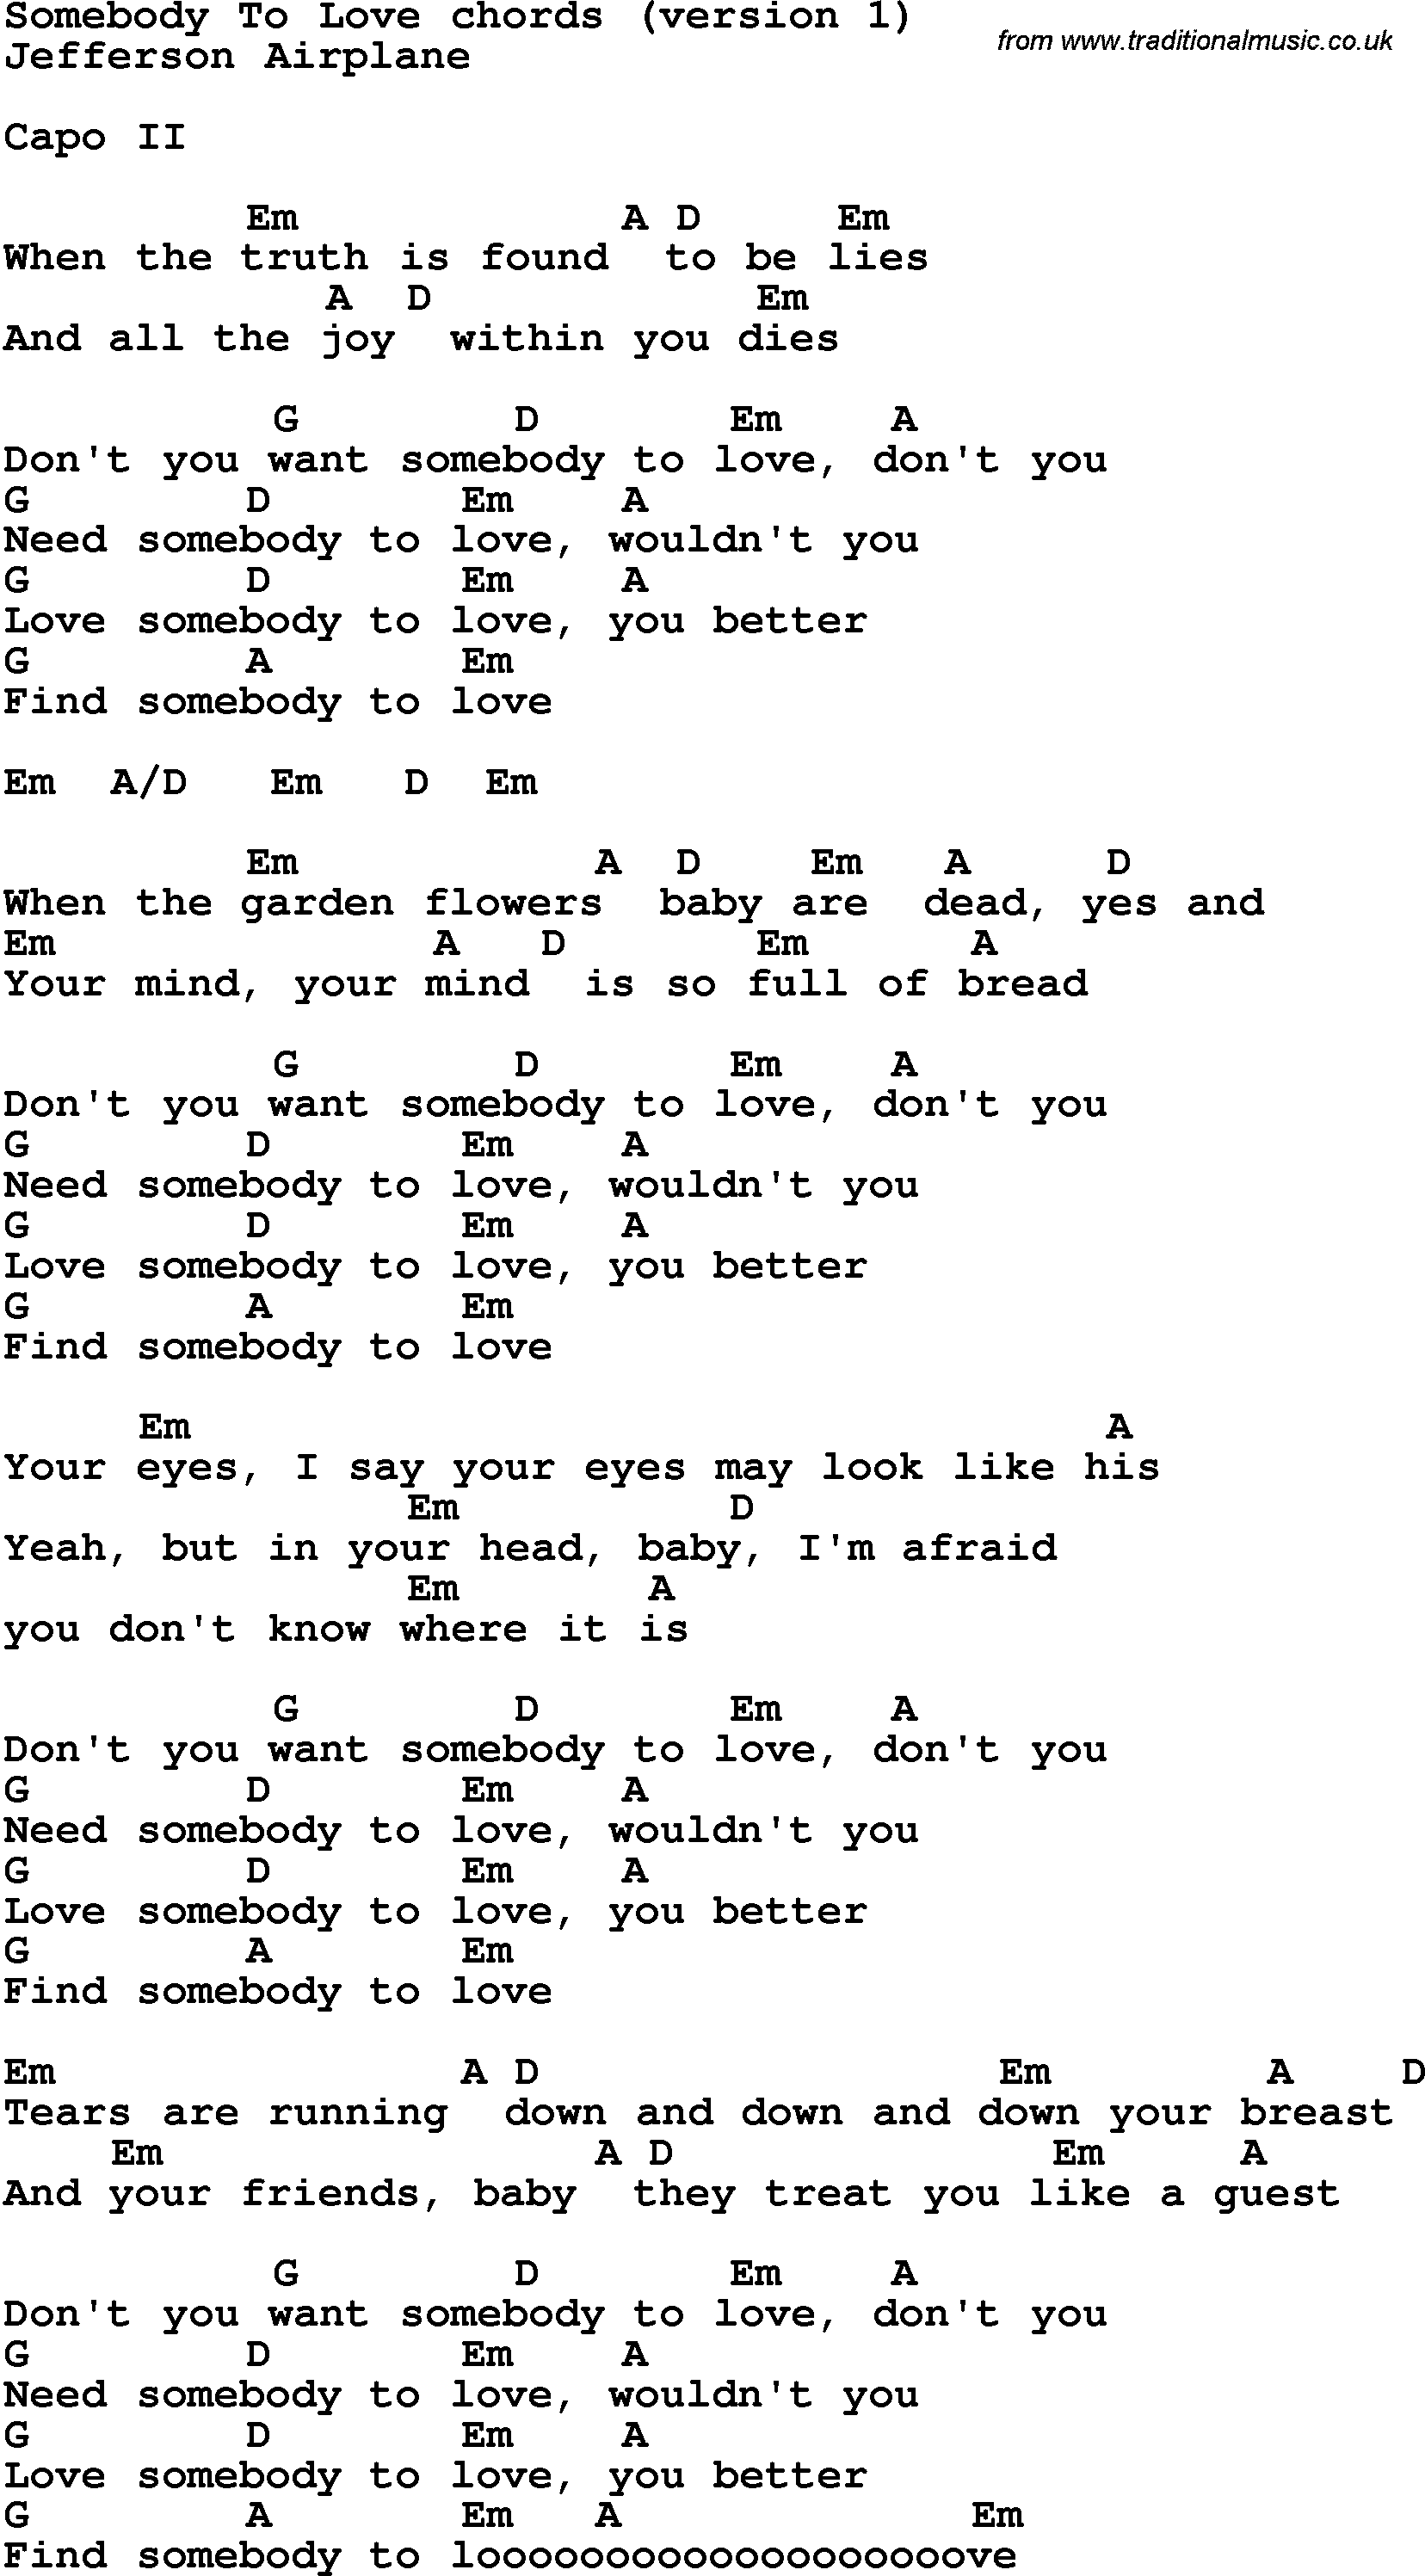 Song Lyrics with guitar chords for Somebody To Loved